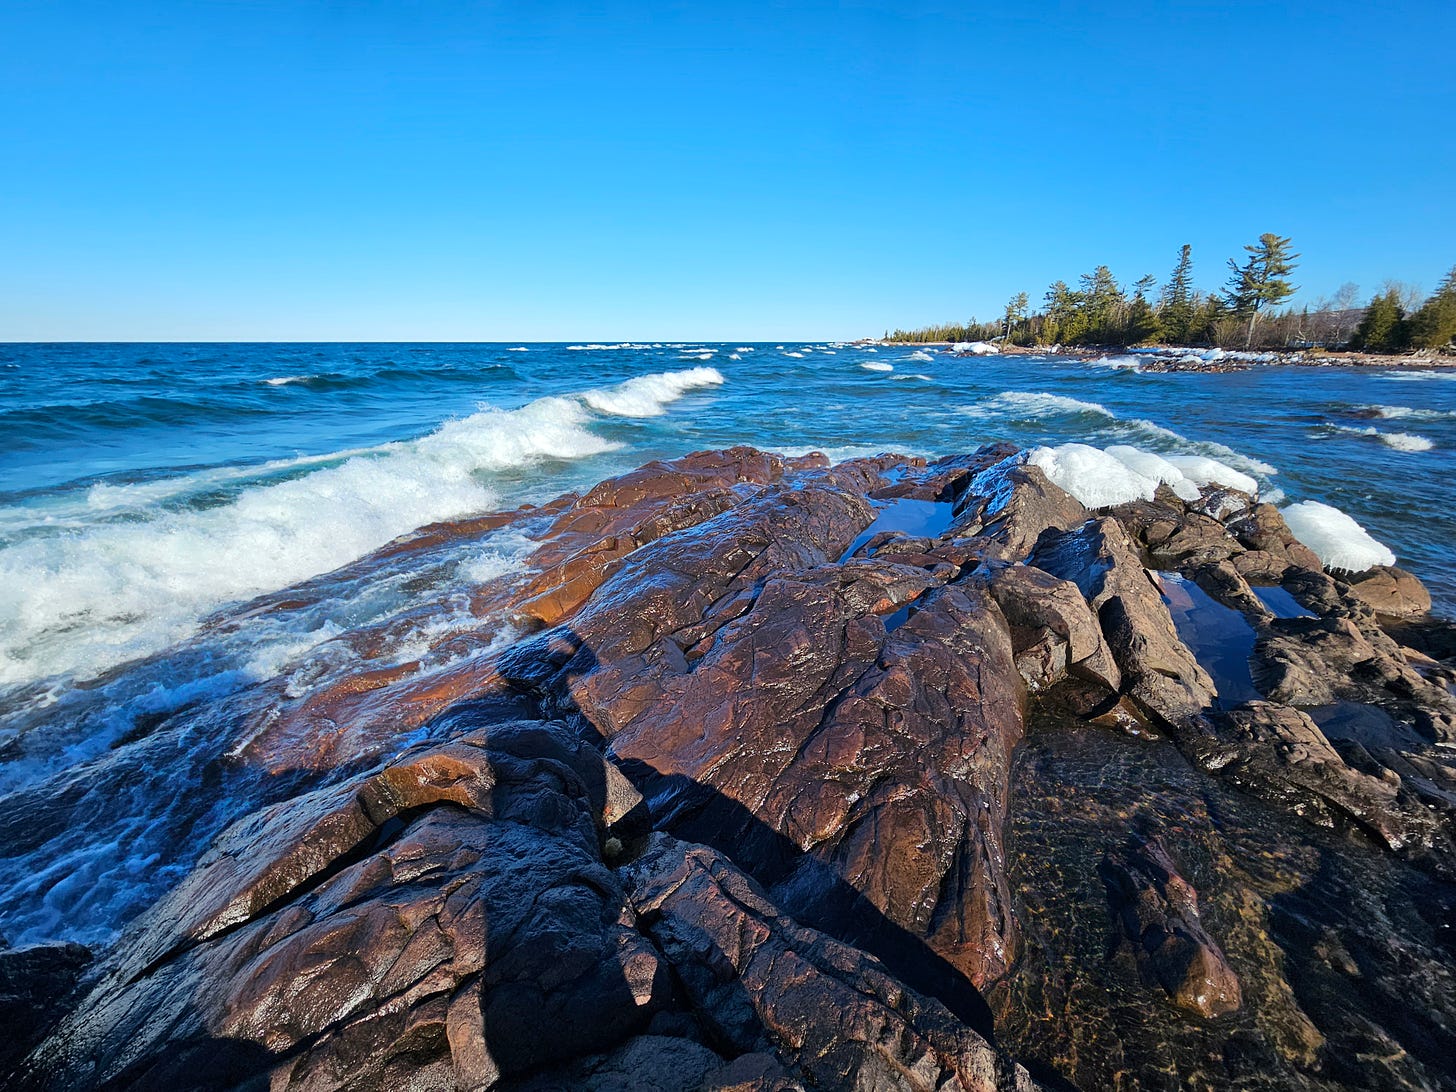 Emily's shadow stretches out across the ice- and snow-covered rocks of a stony outcrop into a turbulent and very blue Lake Superior.